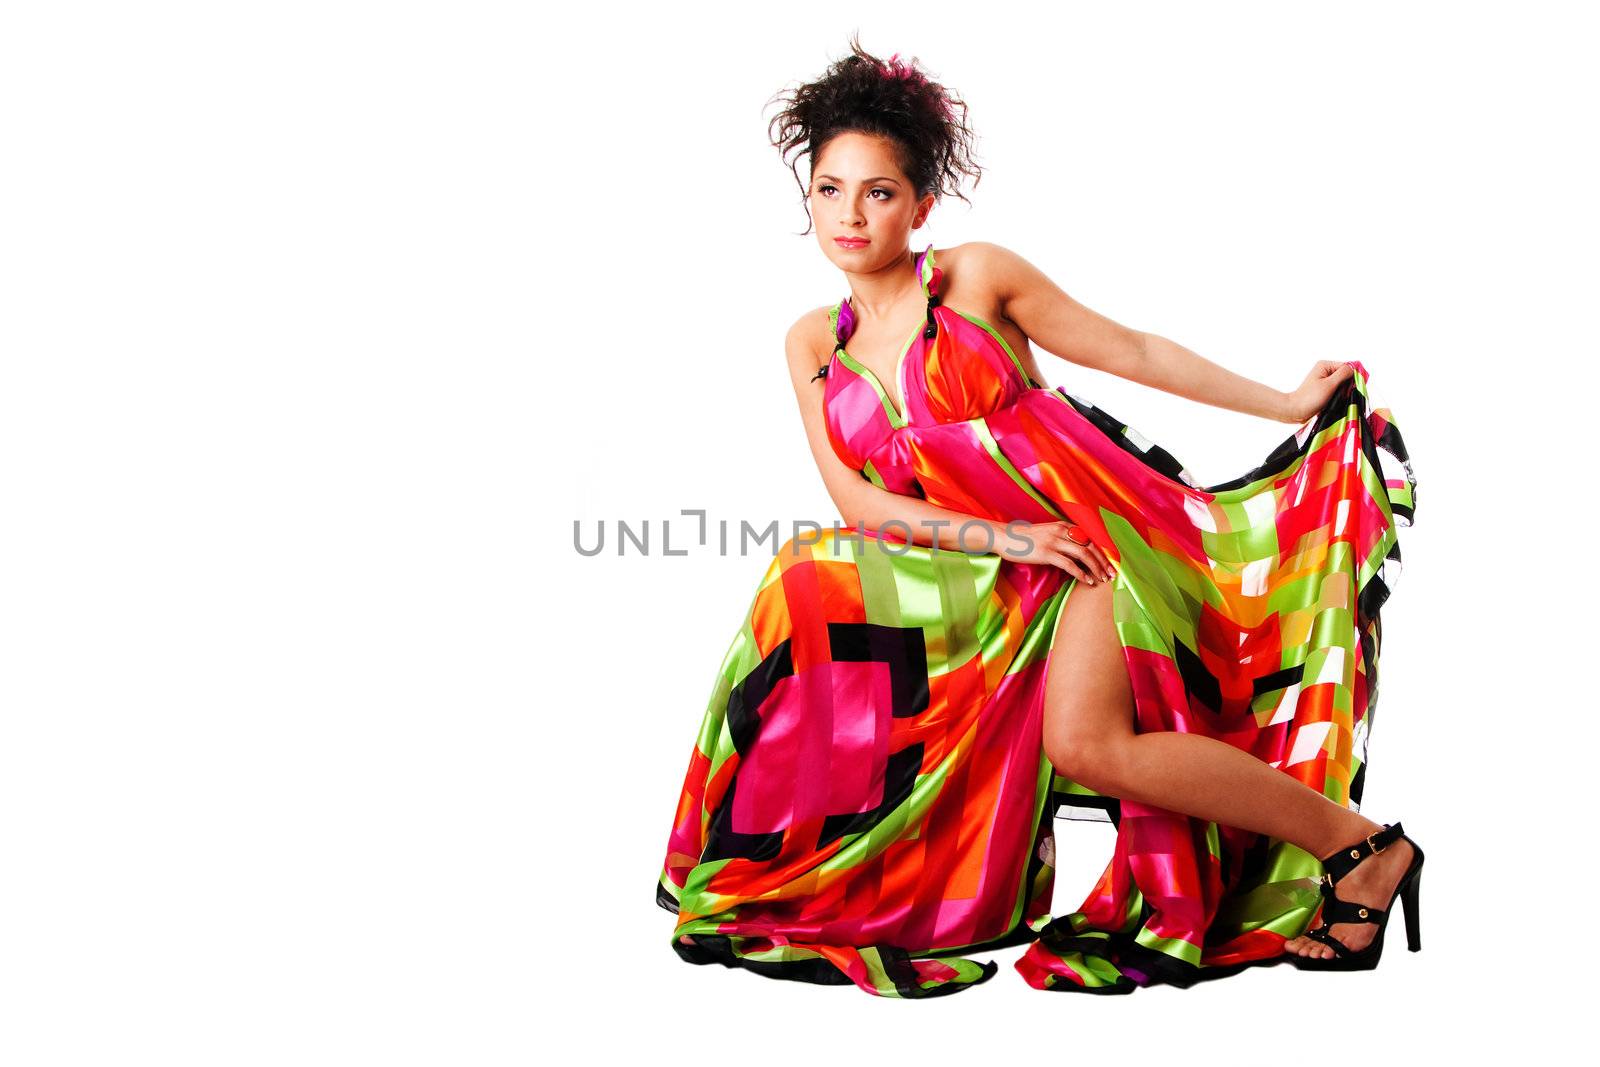 Fashion woman in colorful dress by phakimata